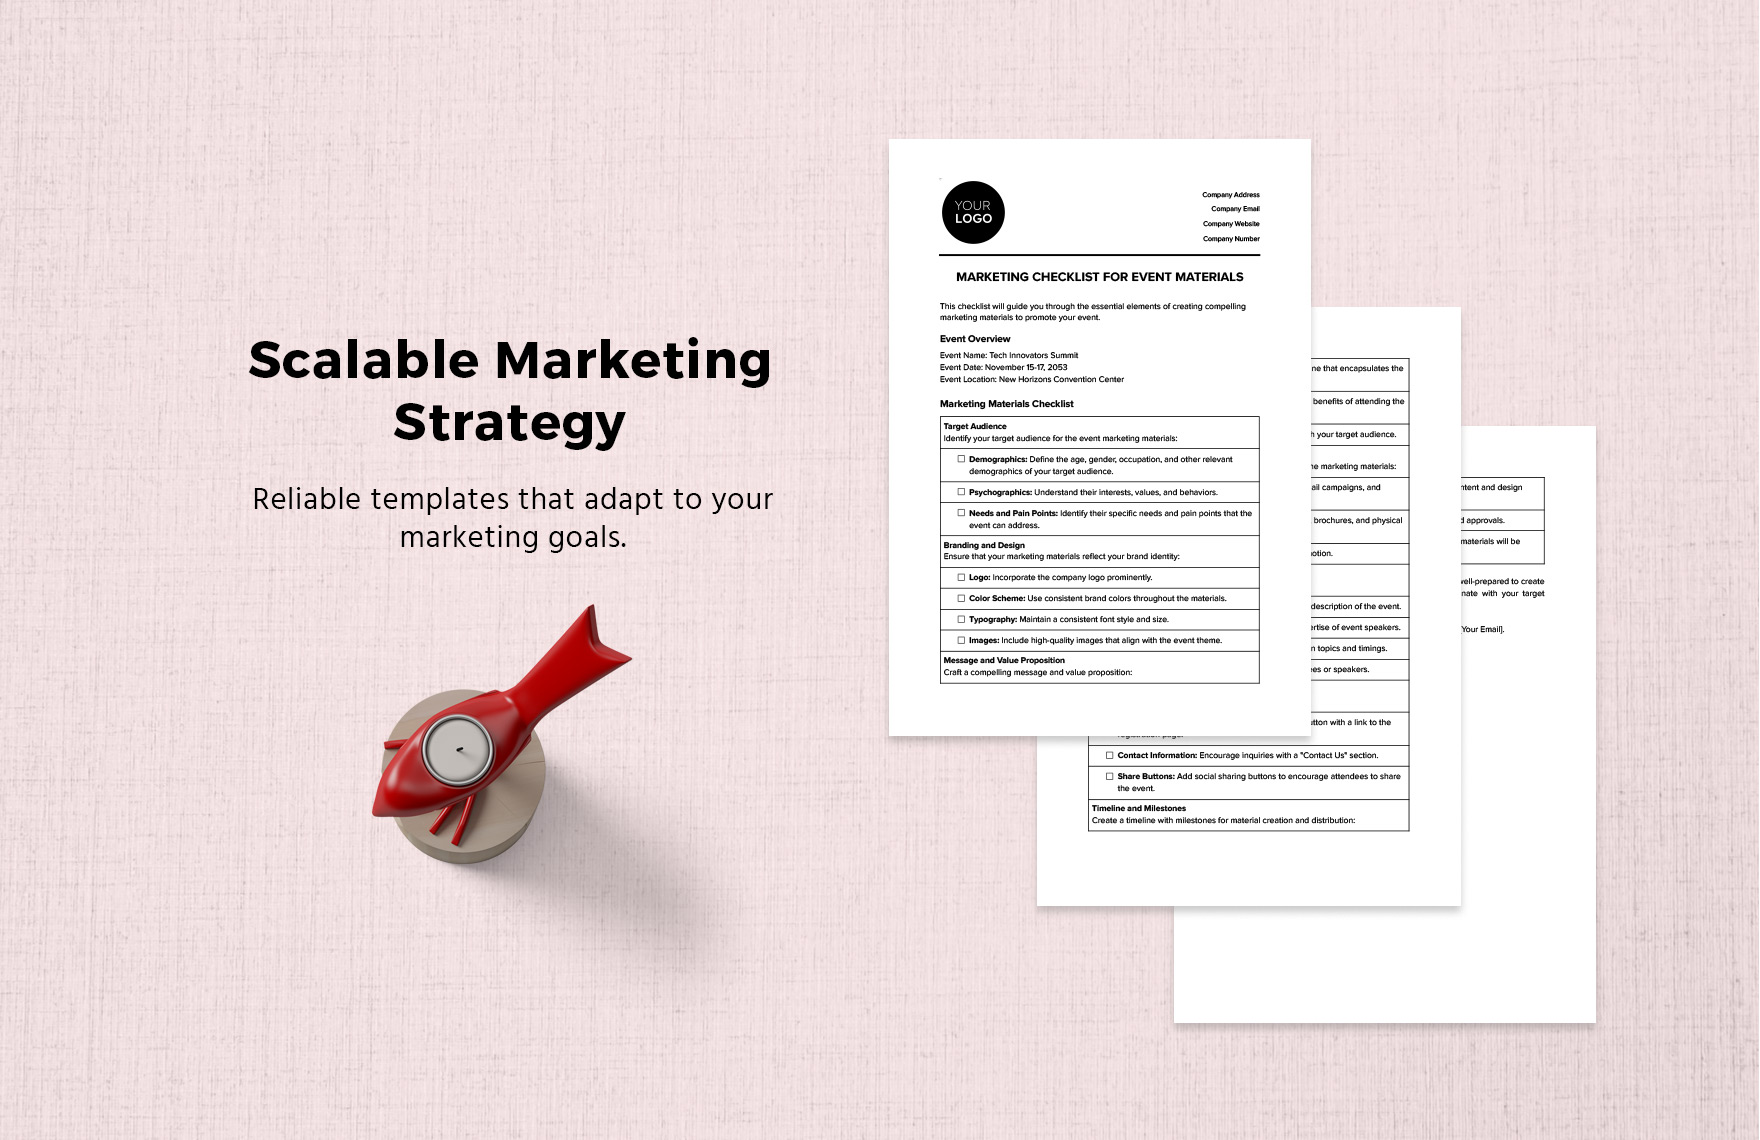 Marketing Checklist for Event Materials Template